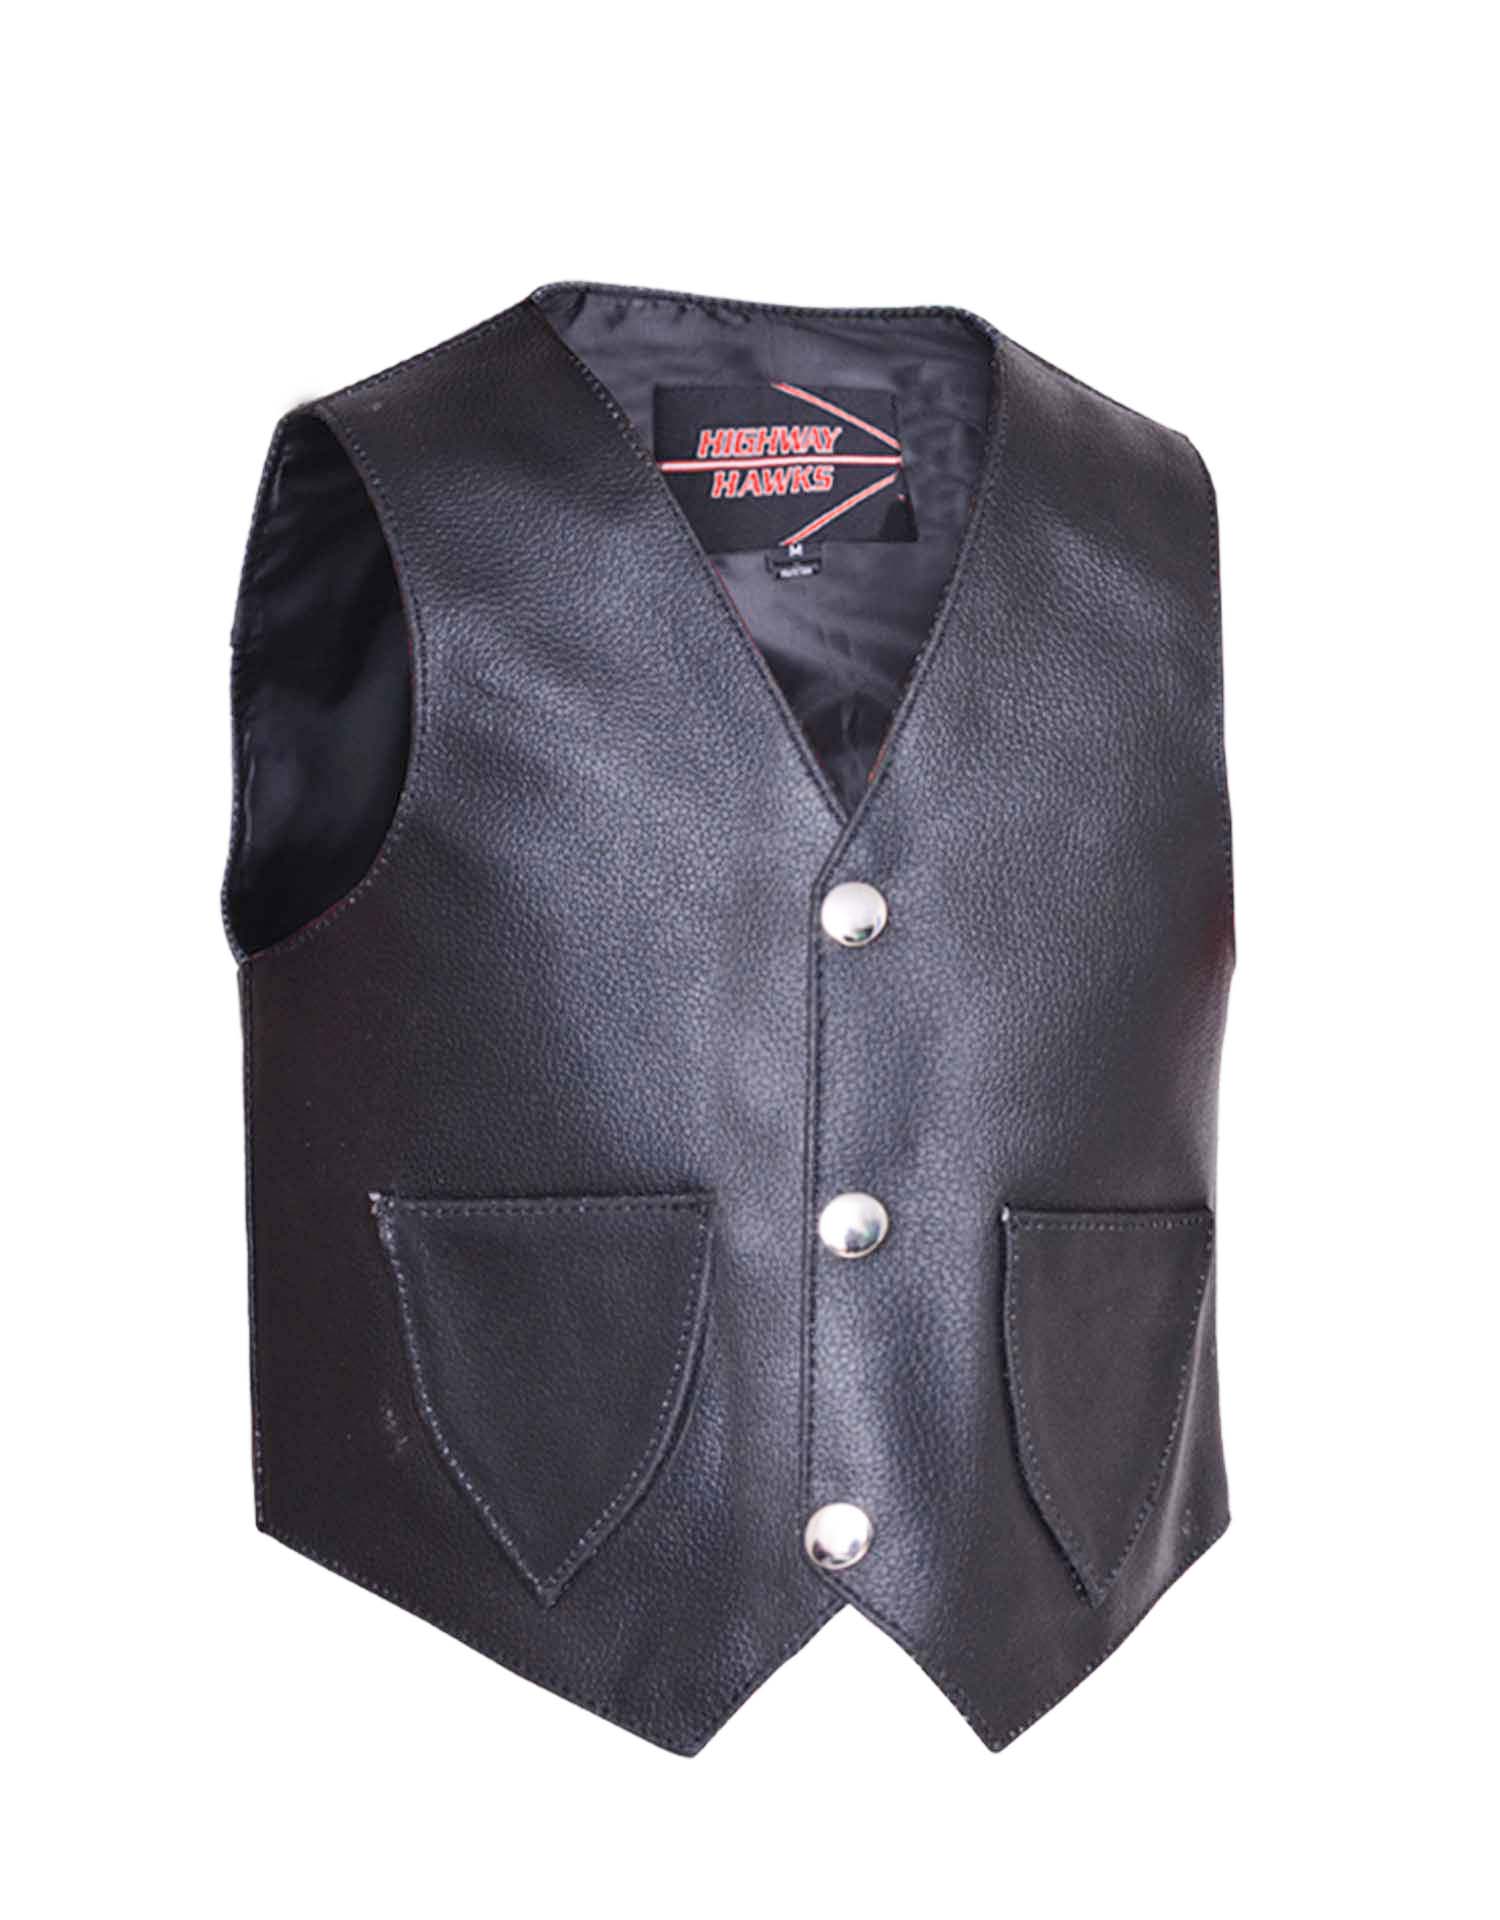 Toddler's Solid Side Black Leather Vest (Size: X-Small)